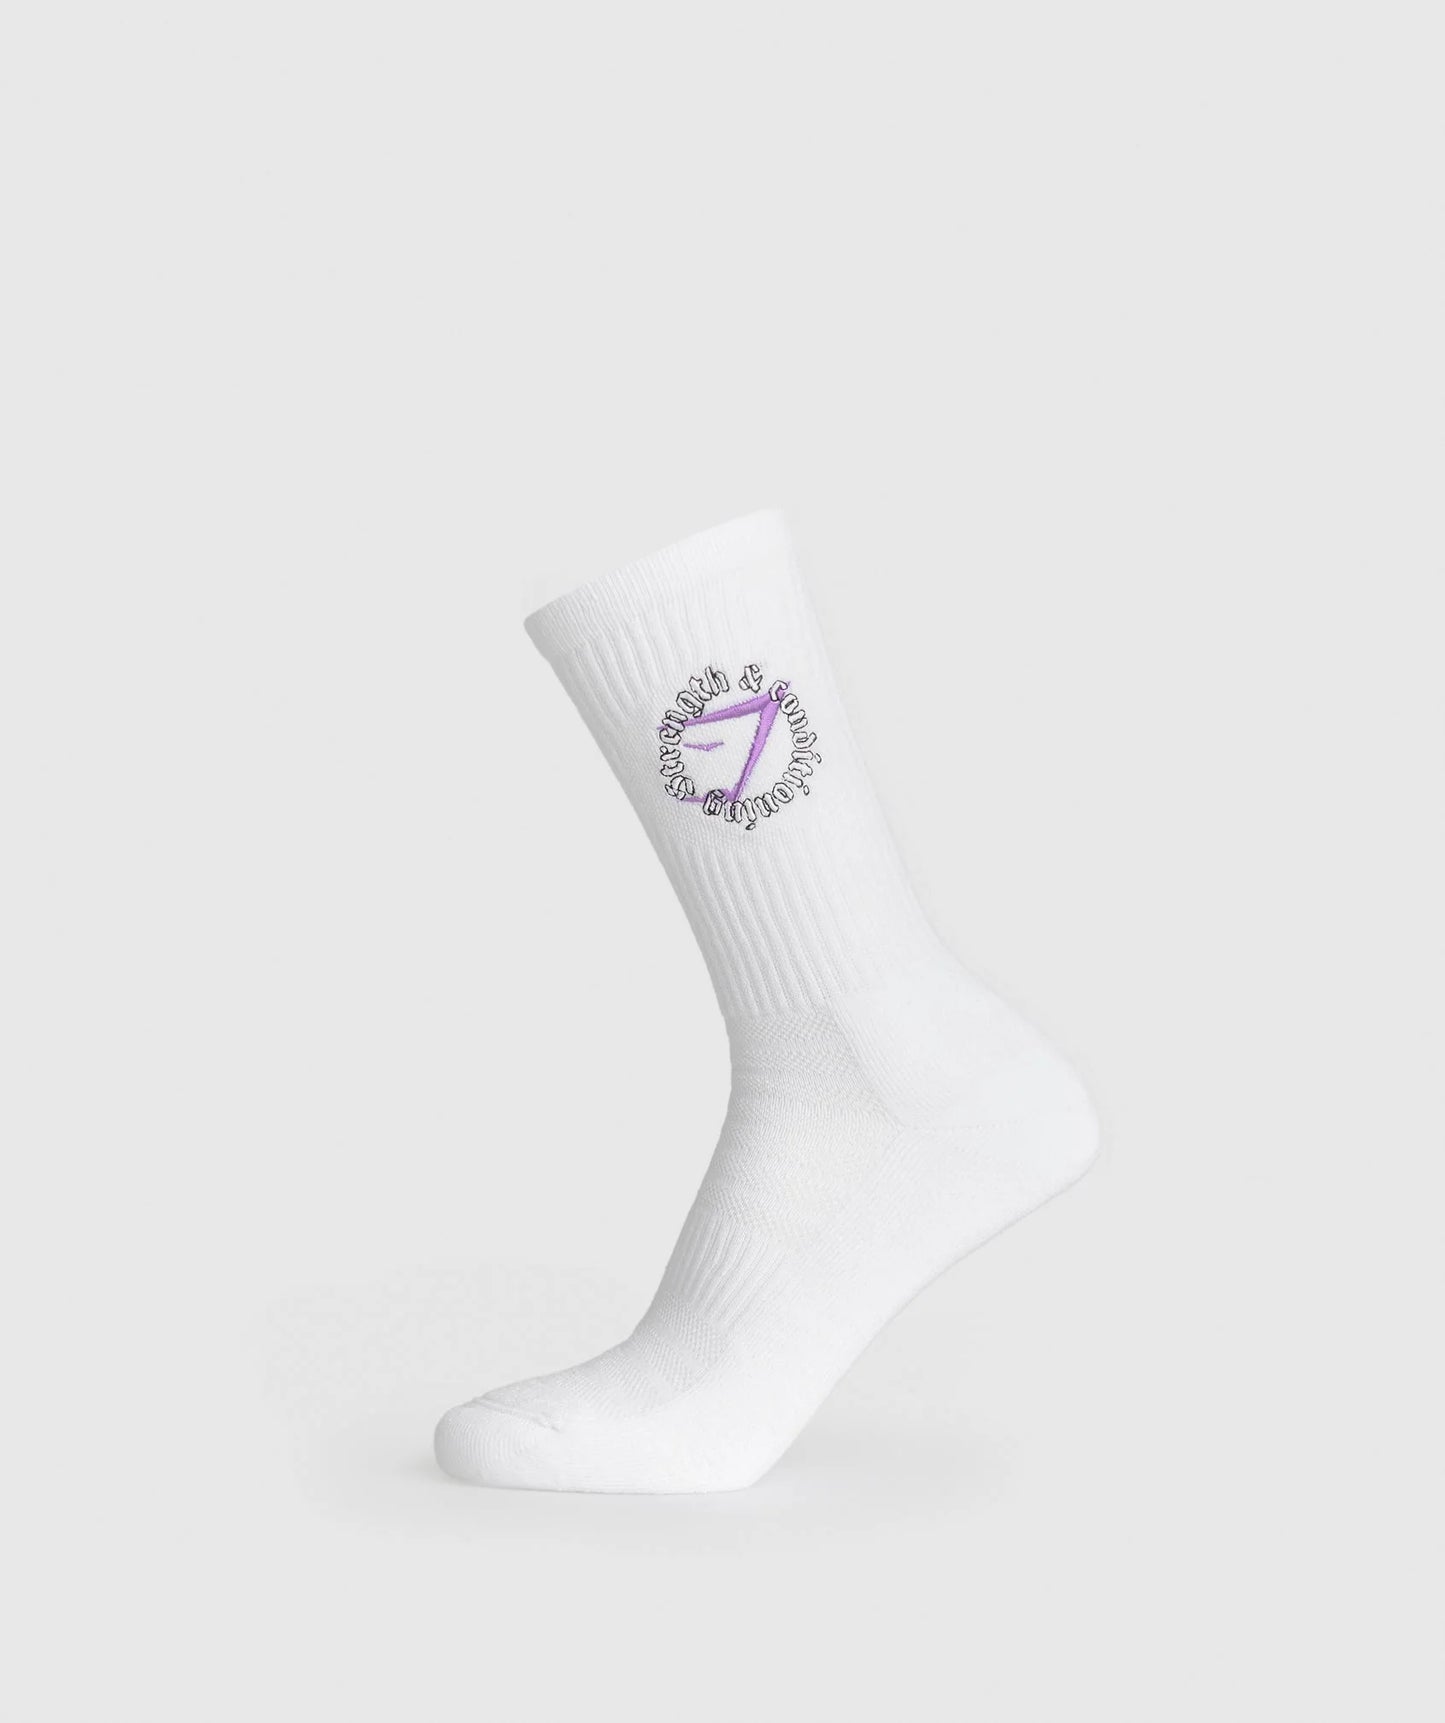 STRENGTH AND CONDITIONING CREW SOCKS - PREVENTA